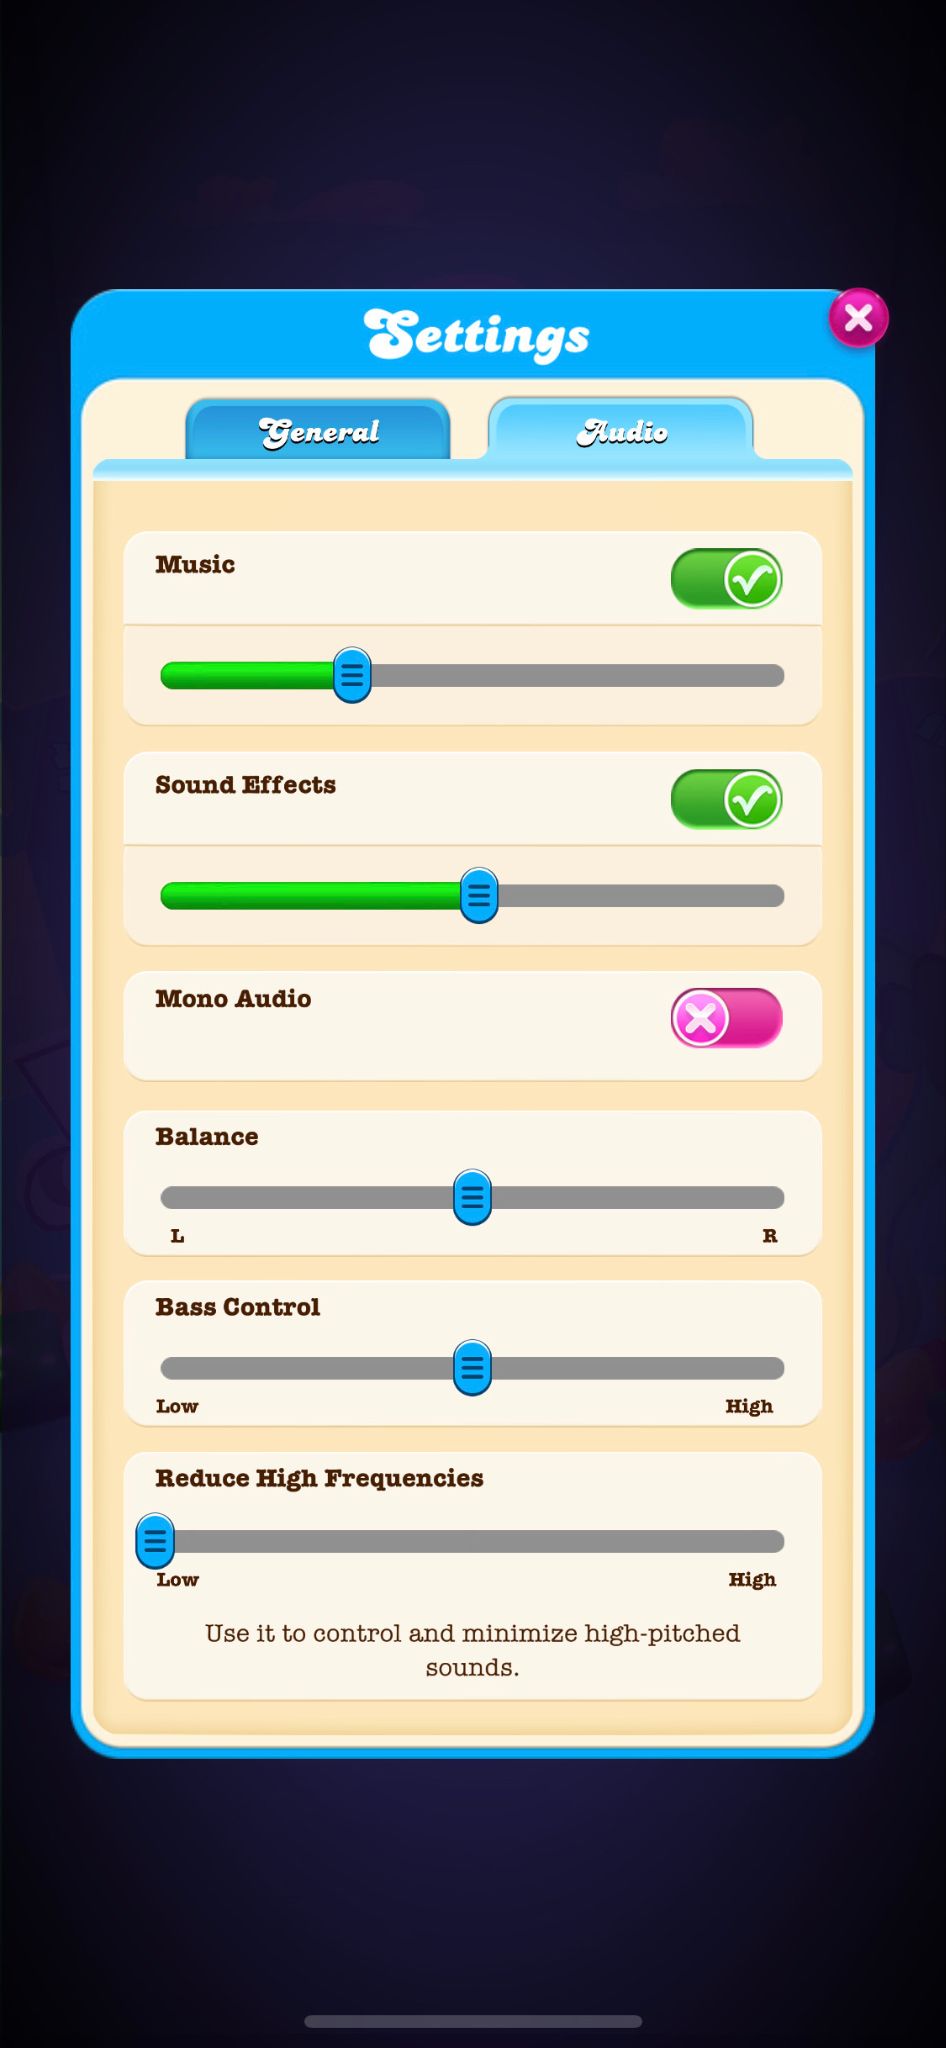 A screenshot of the Audio Accessibility Settings menu in Candy Crush Soda Saga, displaying adjustable sliders for Music, Sound Effects, Mono Audio, Balance, Bass Control, and Reduce High Frequencies.